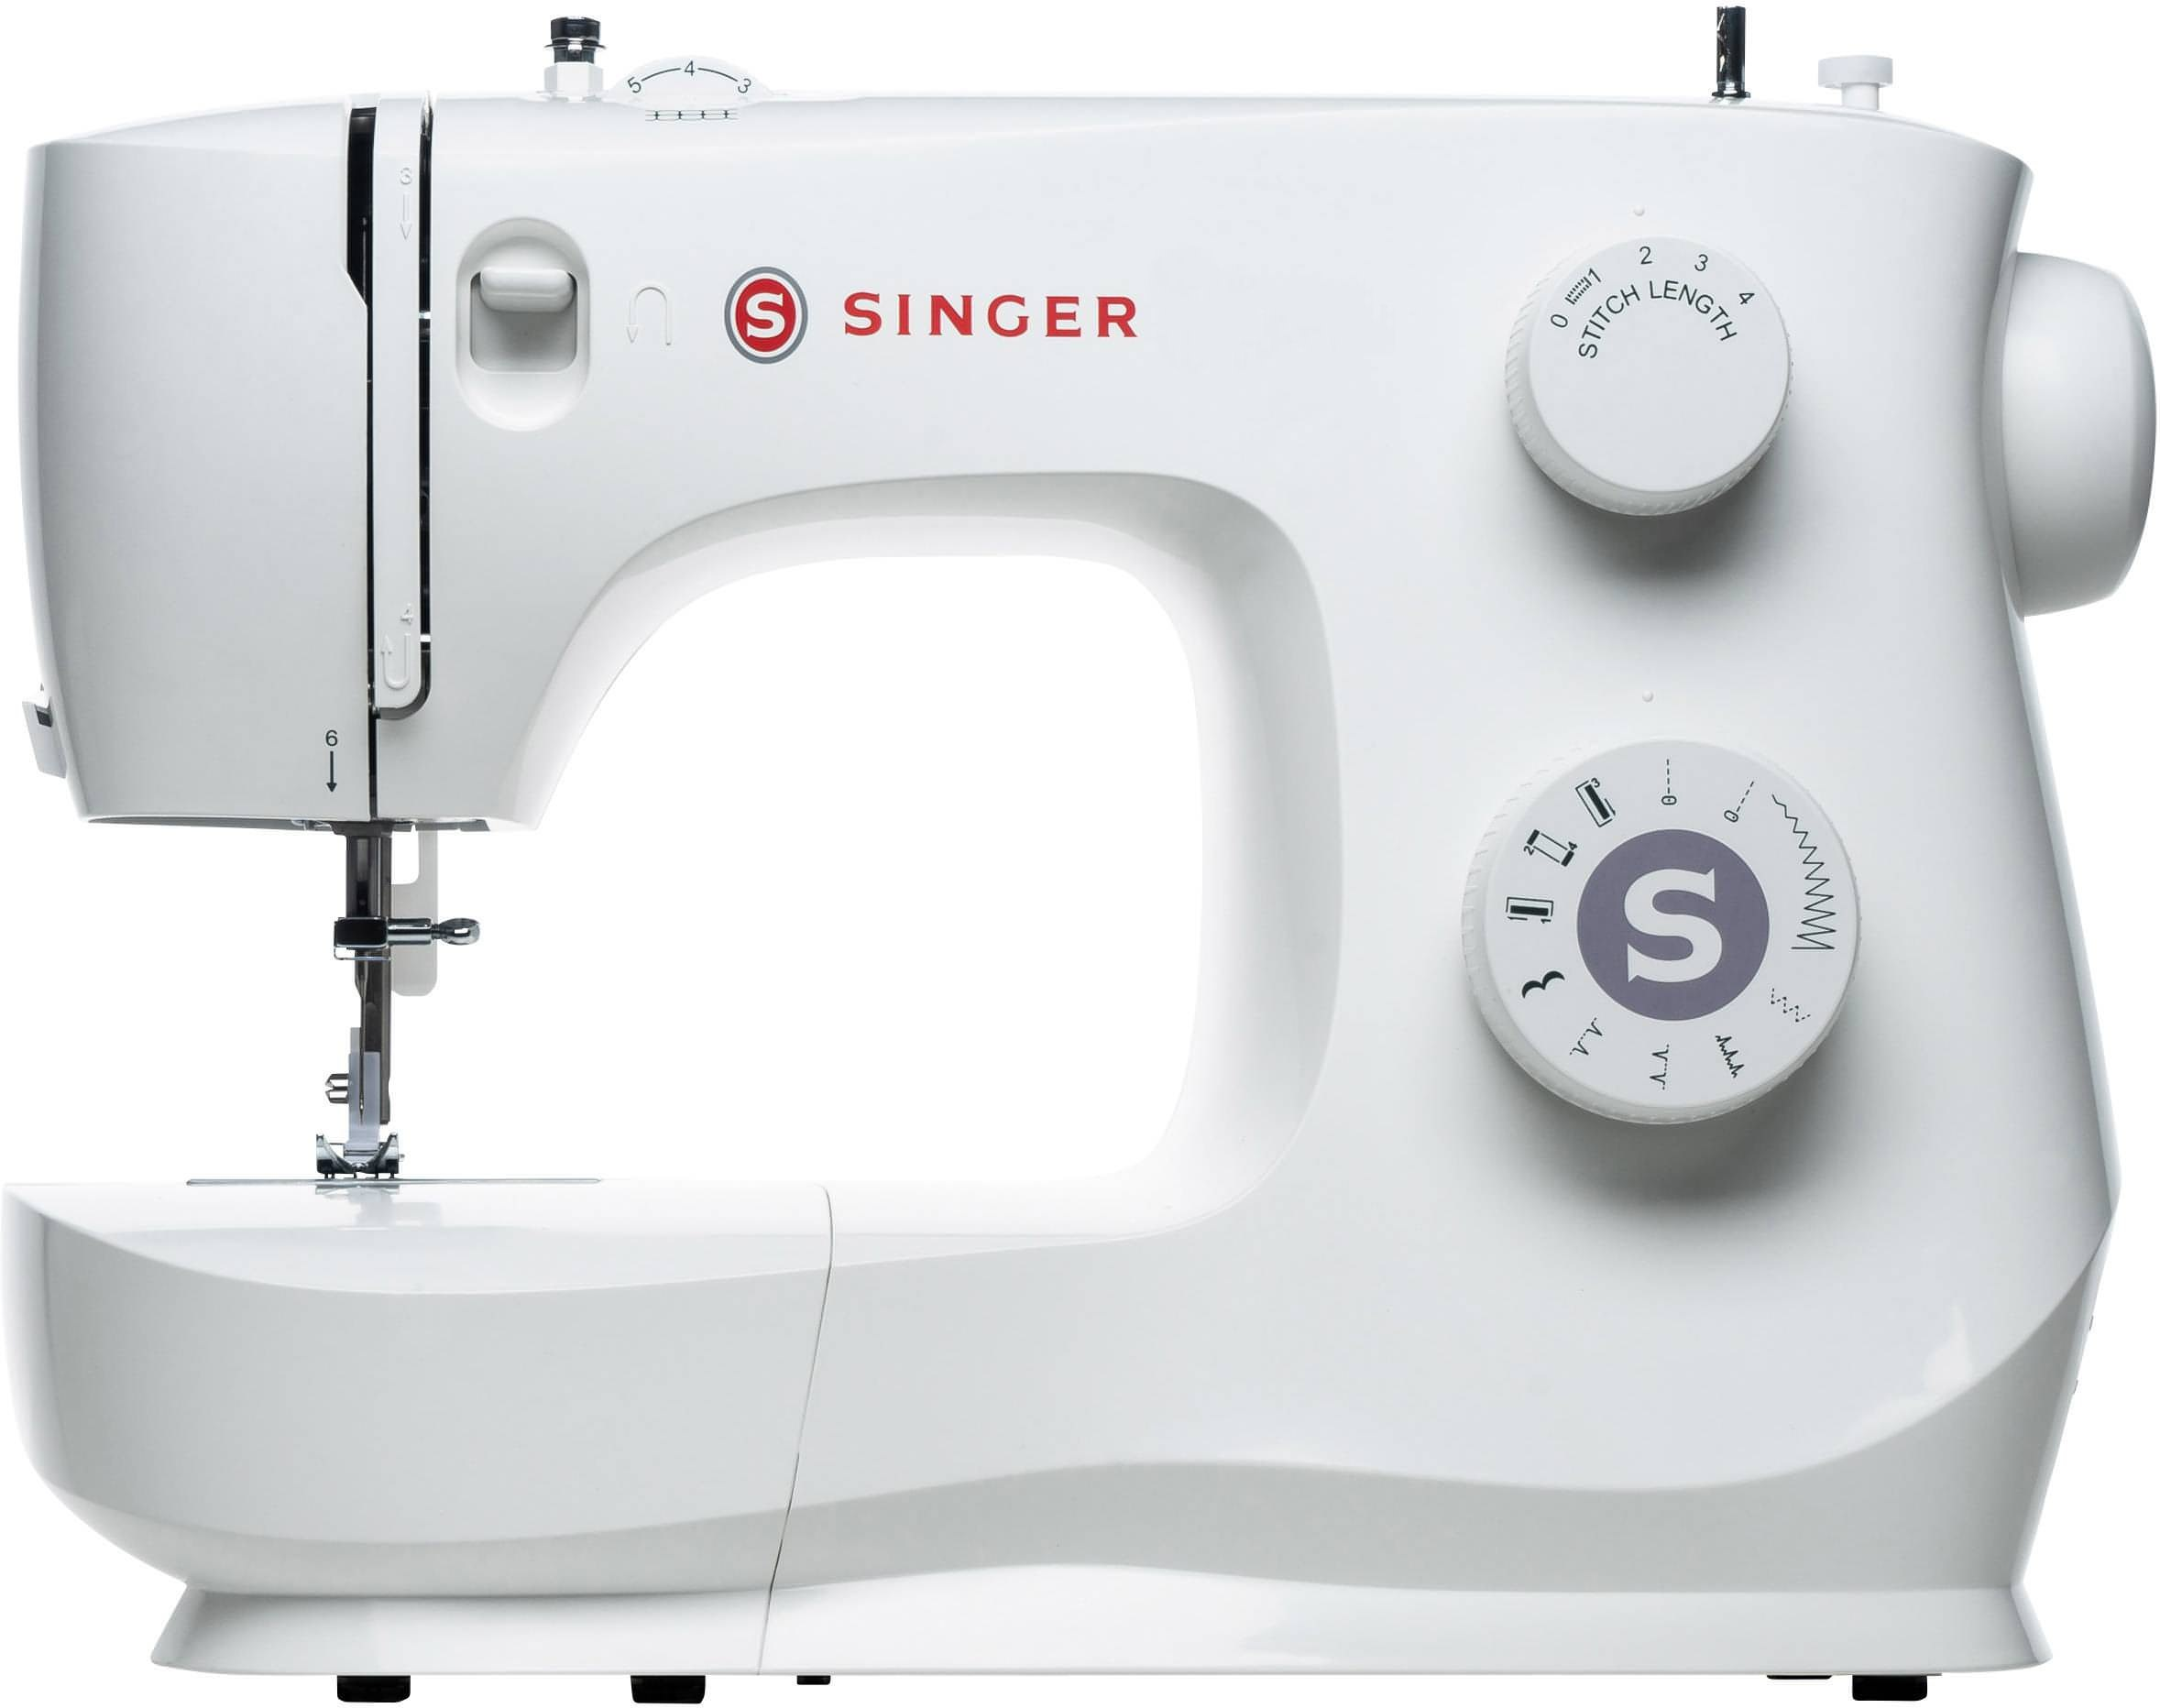 Singer M2405 Sewing Machine - Ideal machine for beginner to intermediate sewists. Used in lots of schools and colleges.